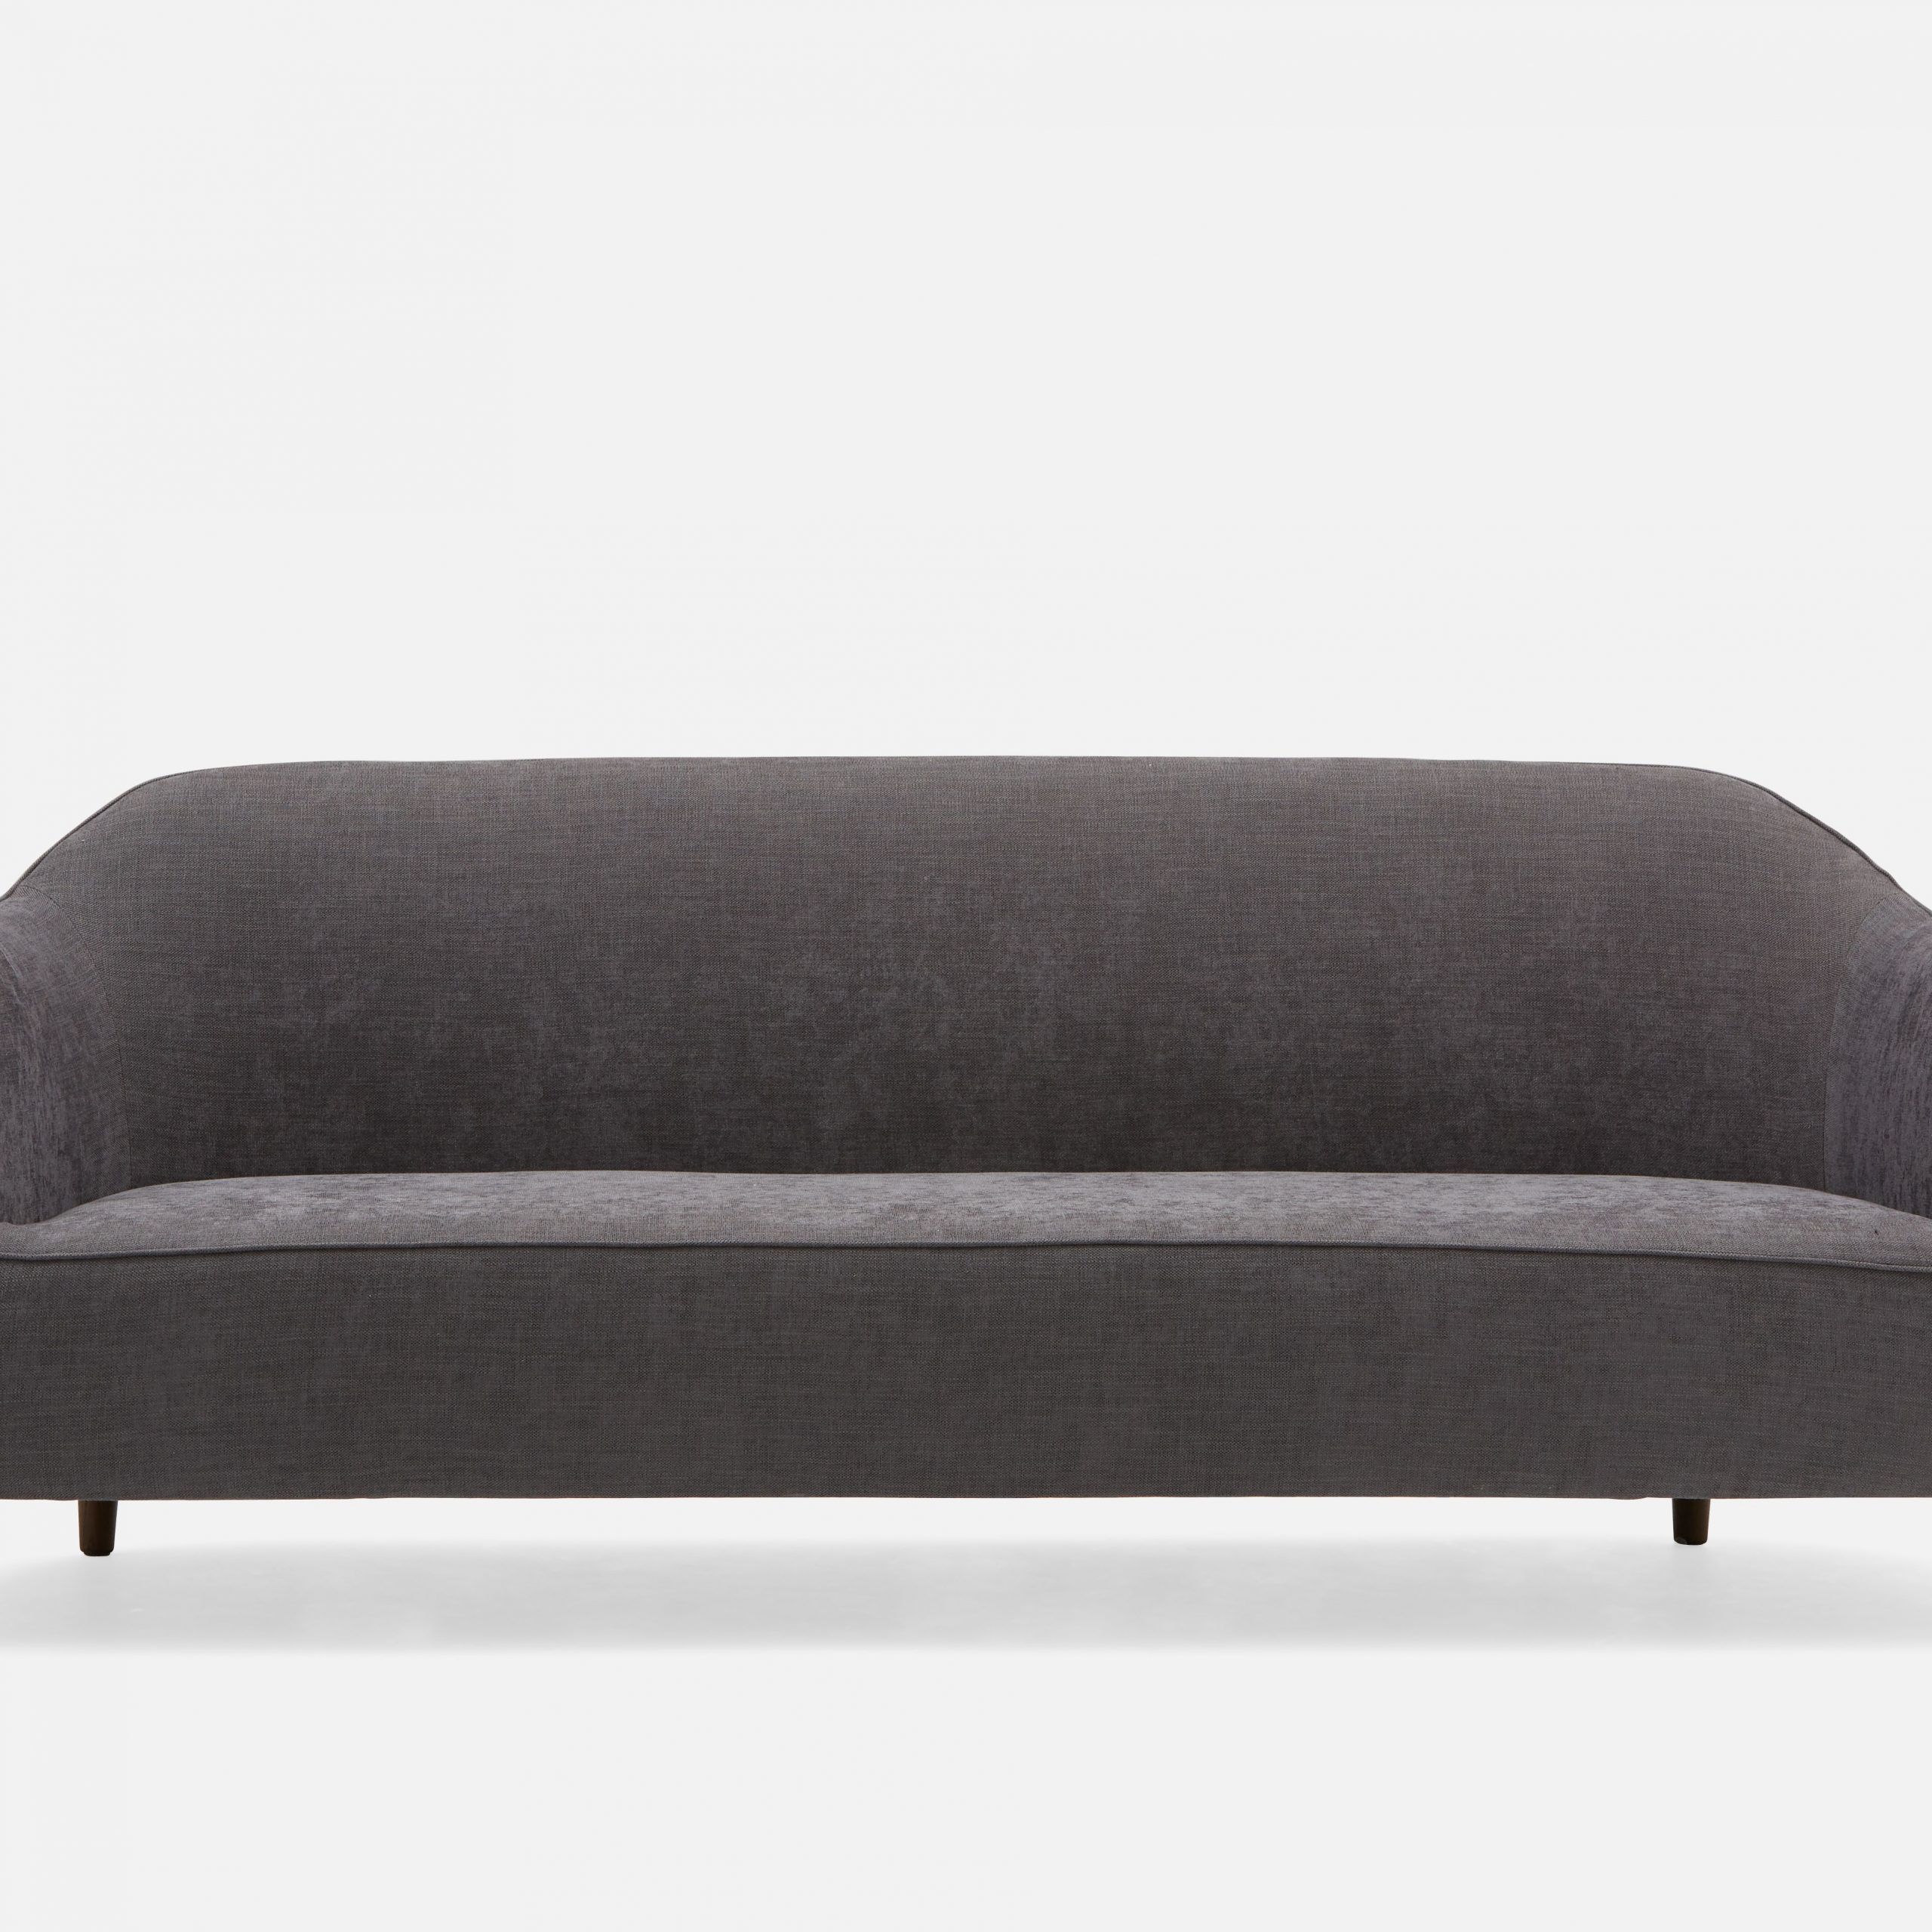 Grey 3 Seater Sofa | Structube Laurel | 3 Seater Sofa Intended For Laurel Gray Sofas (View 13 of 15)